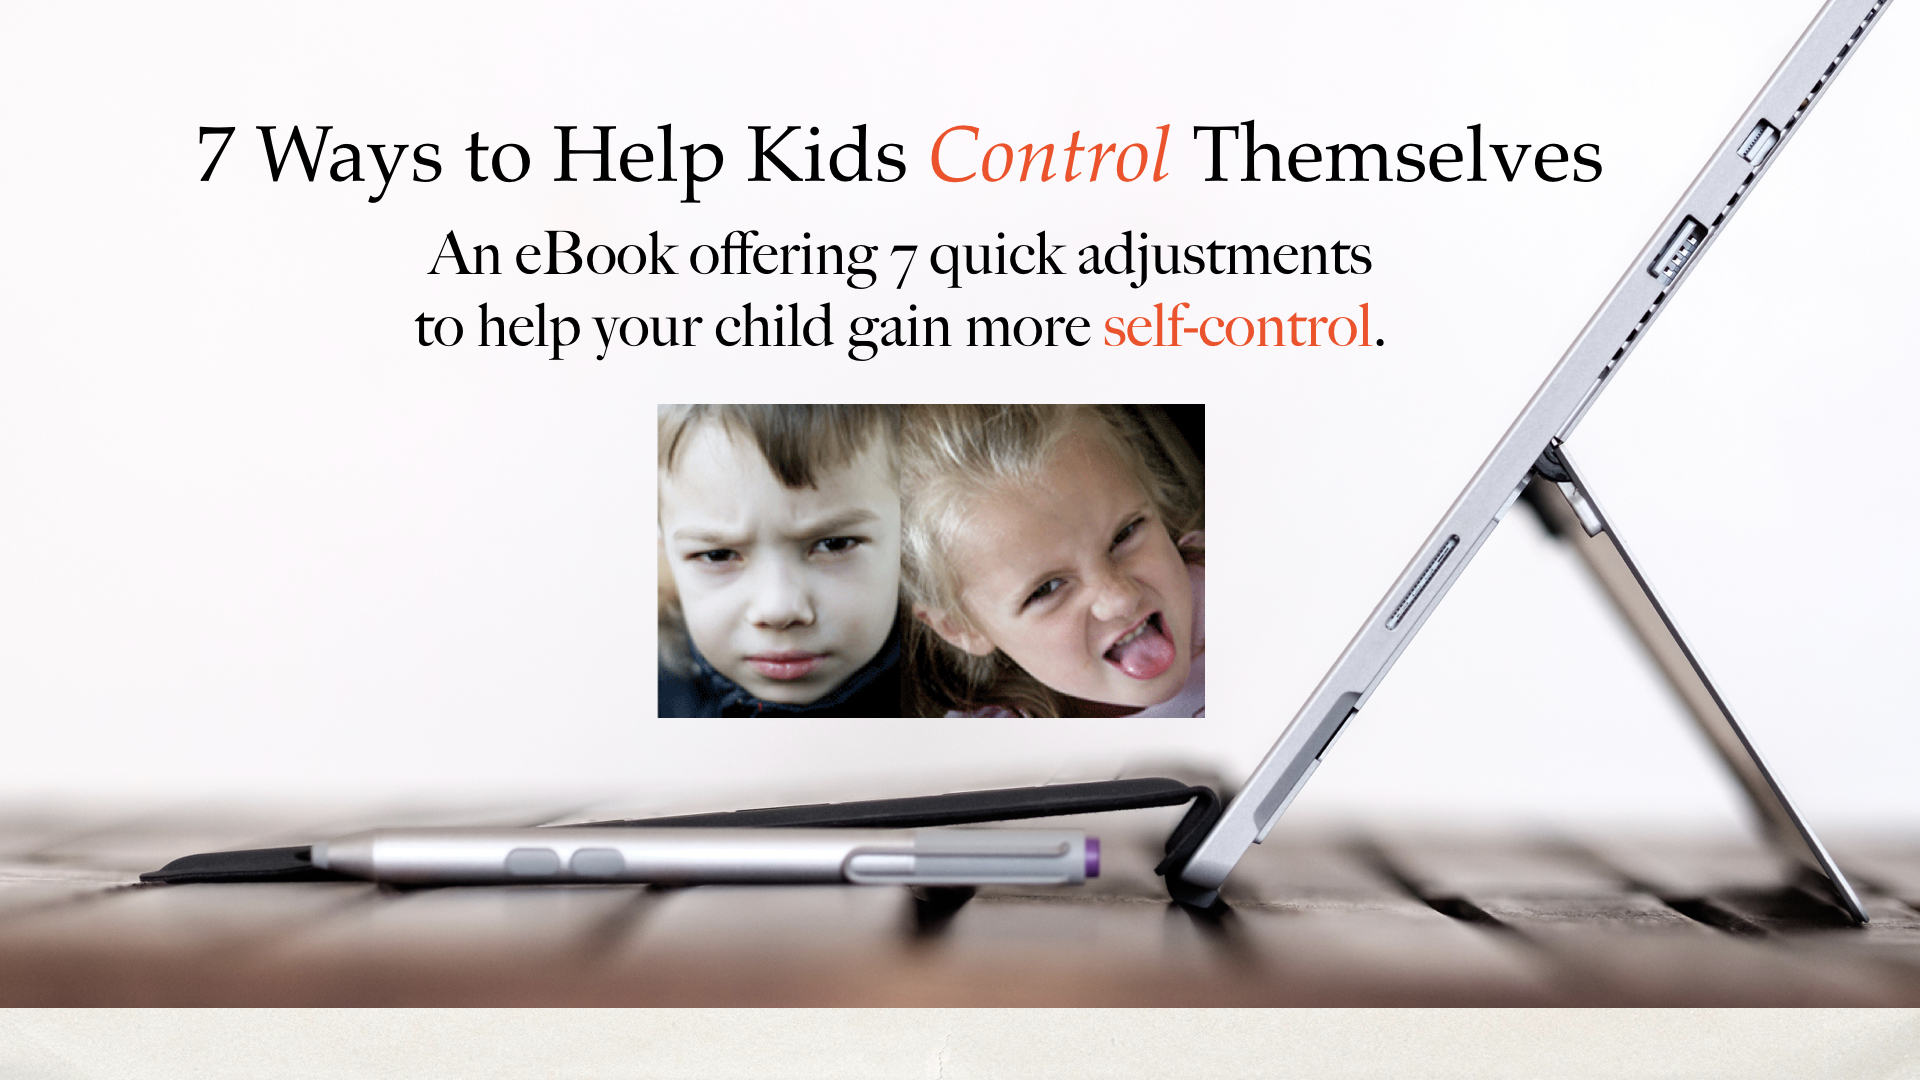 7 Ways To Help Kids Control Themselves. An eBook with 7 Quick Adjustments you can make to help your child gain more self-control.